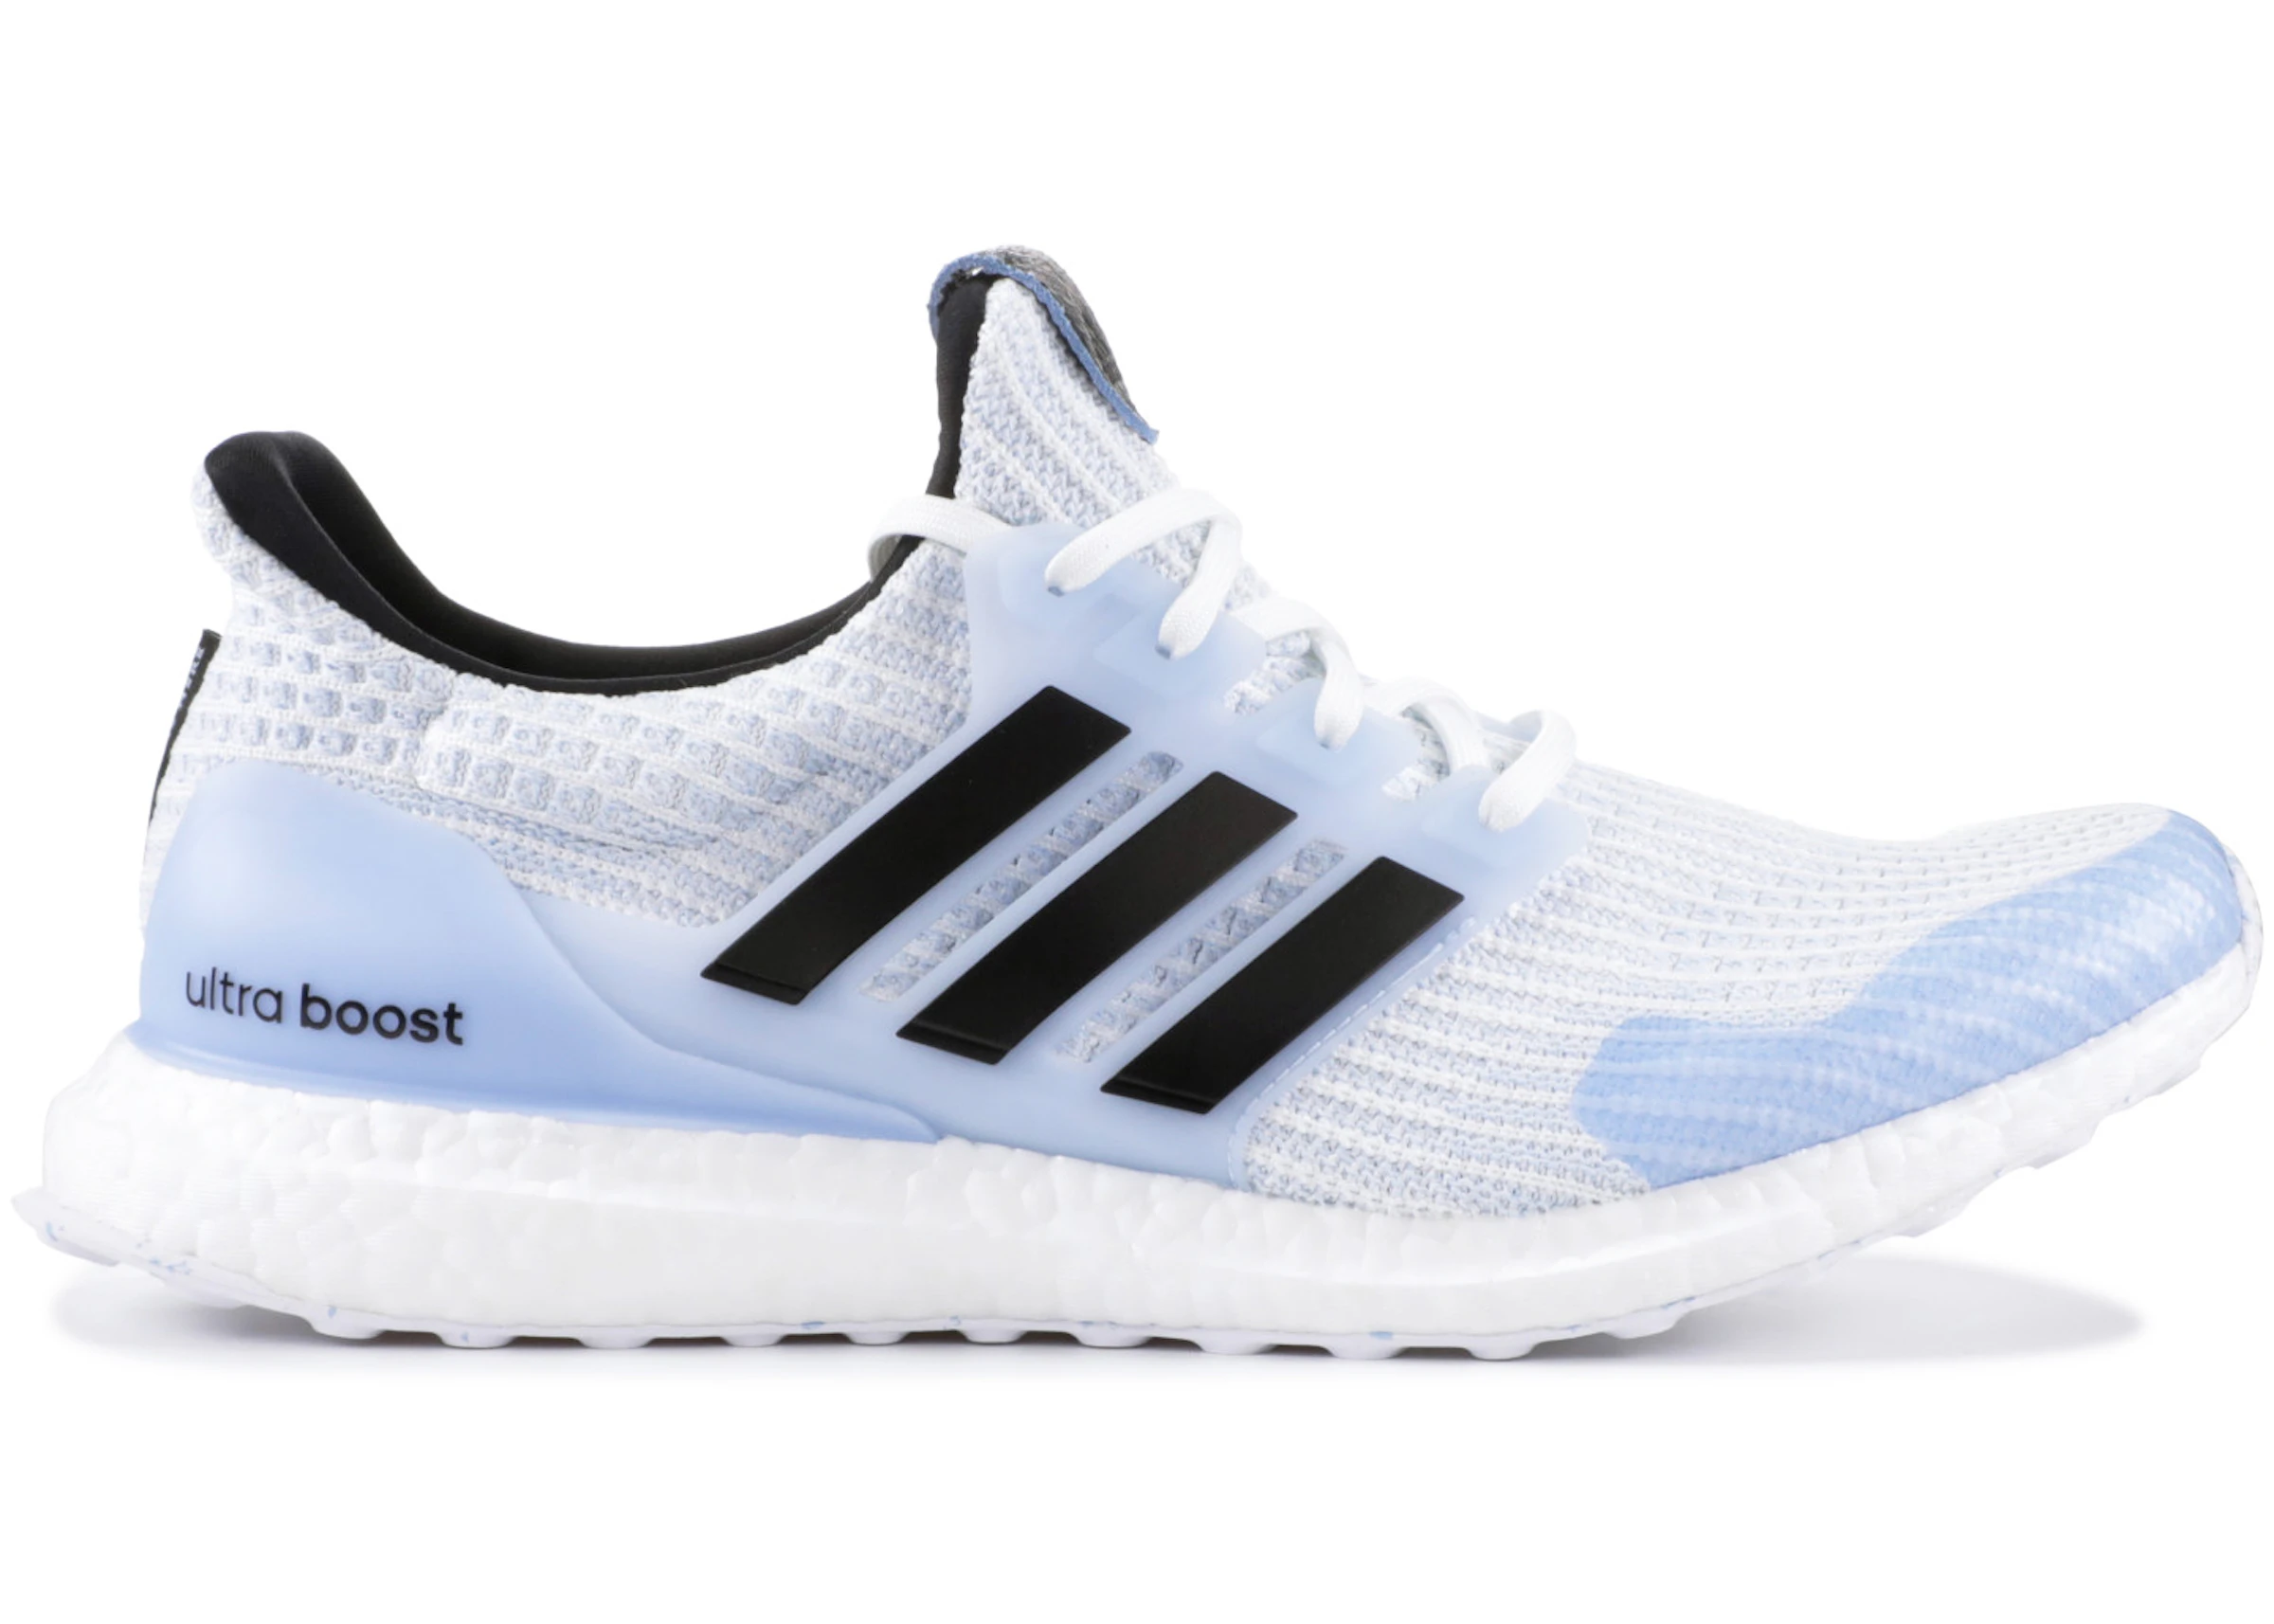 adidas Ultra Boost 4.0 Game of Thrones White Walkers - EE3708 -